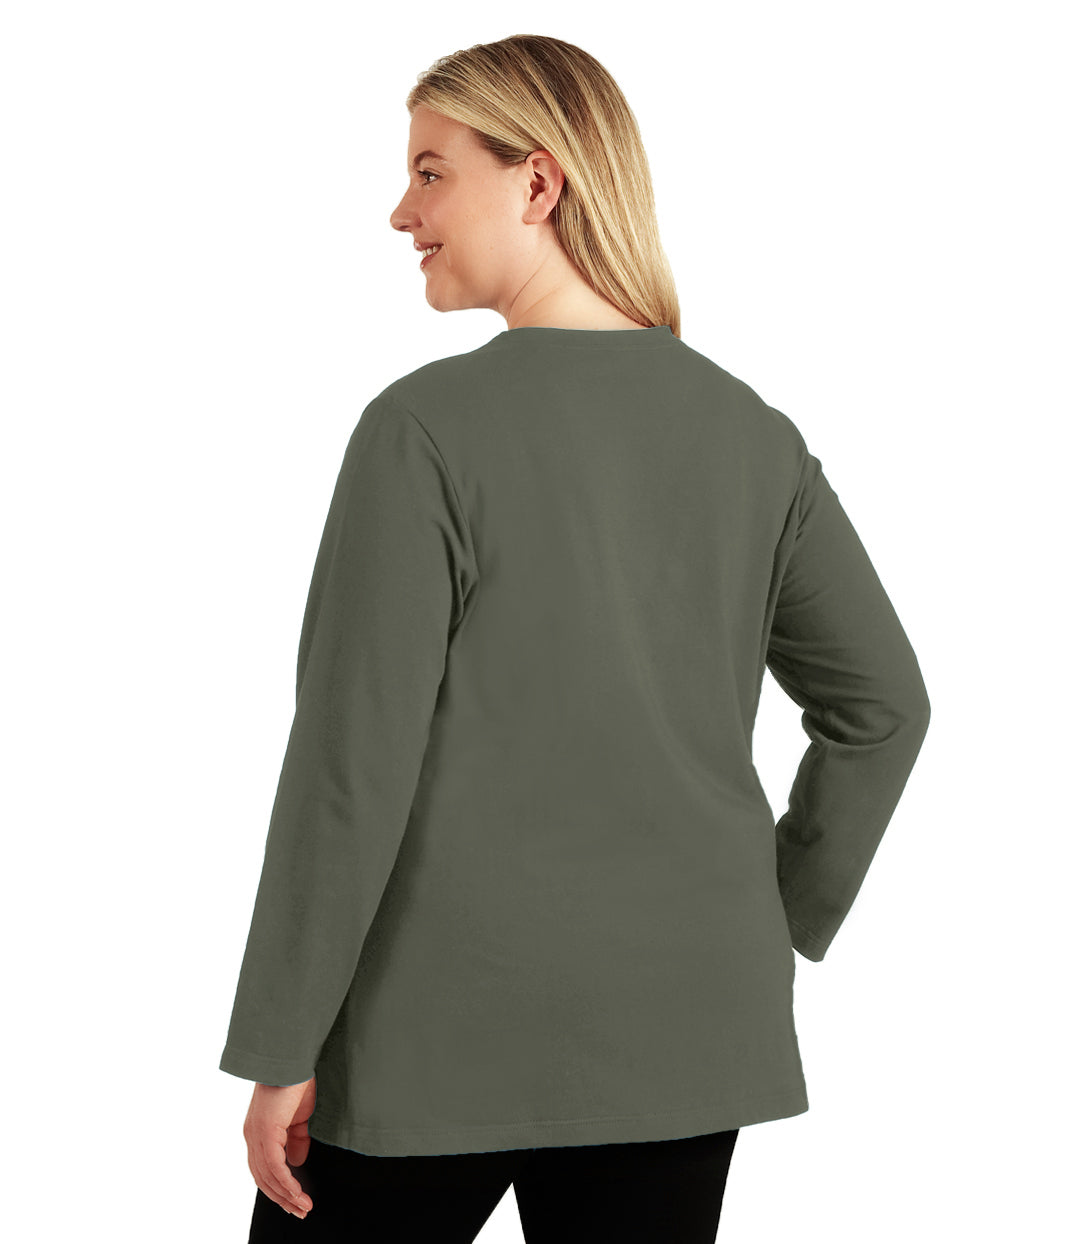 Plus size woman, facing back looking left, wearing JunoActive plus size Stretch Naturals Long Sleeve V-Neck Top in the color Moss Green. She is wearing JunoActive Plus Size Leggings in the color Black.